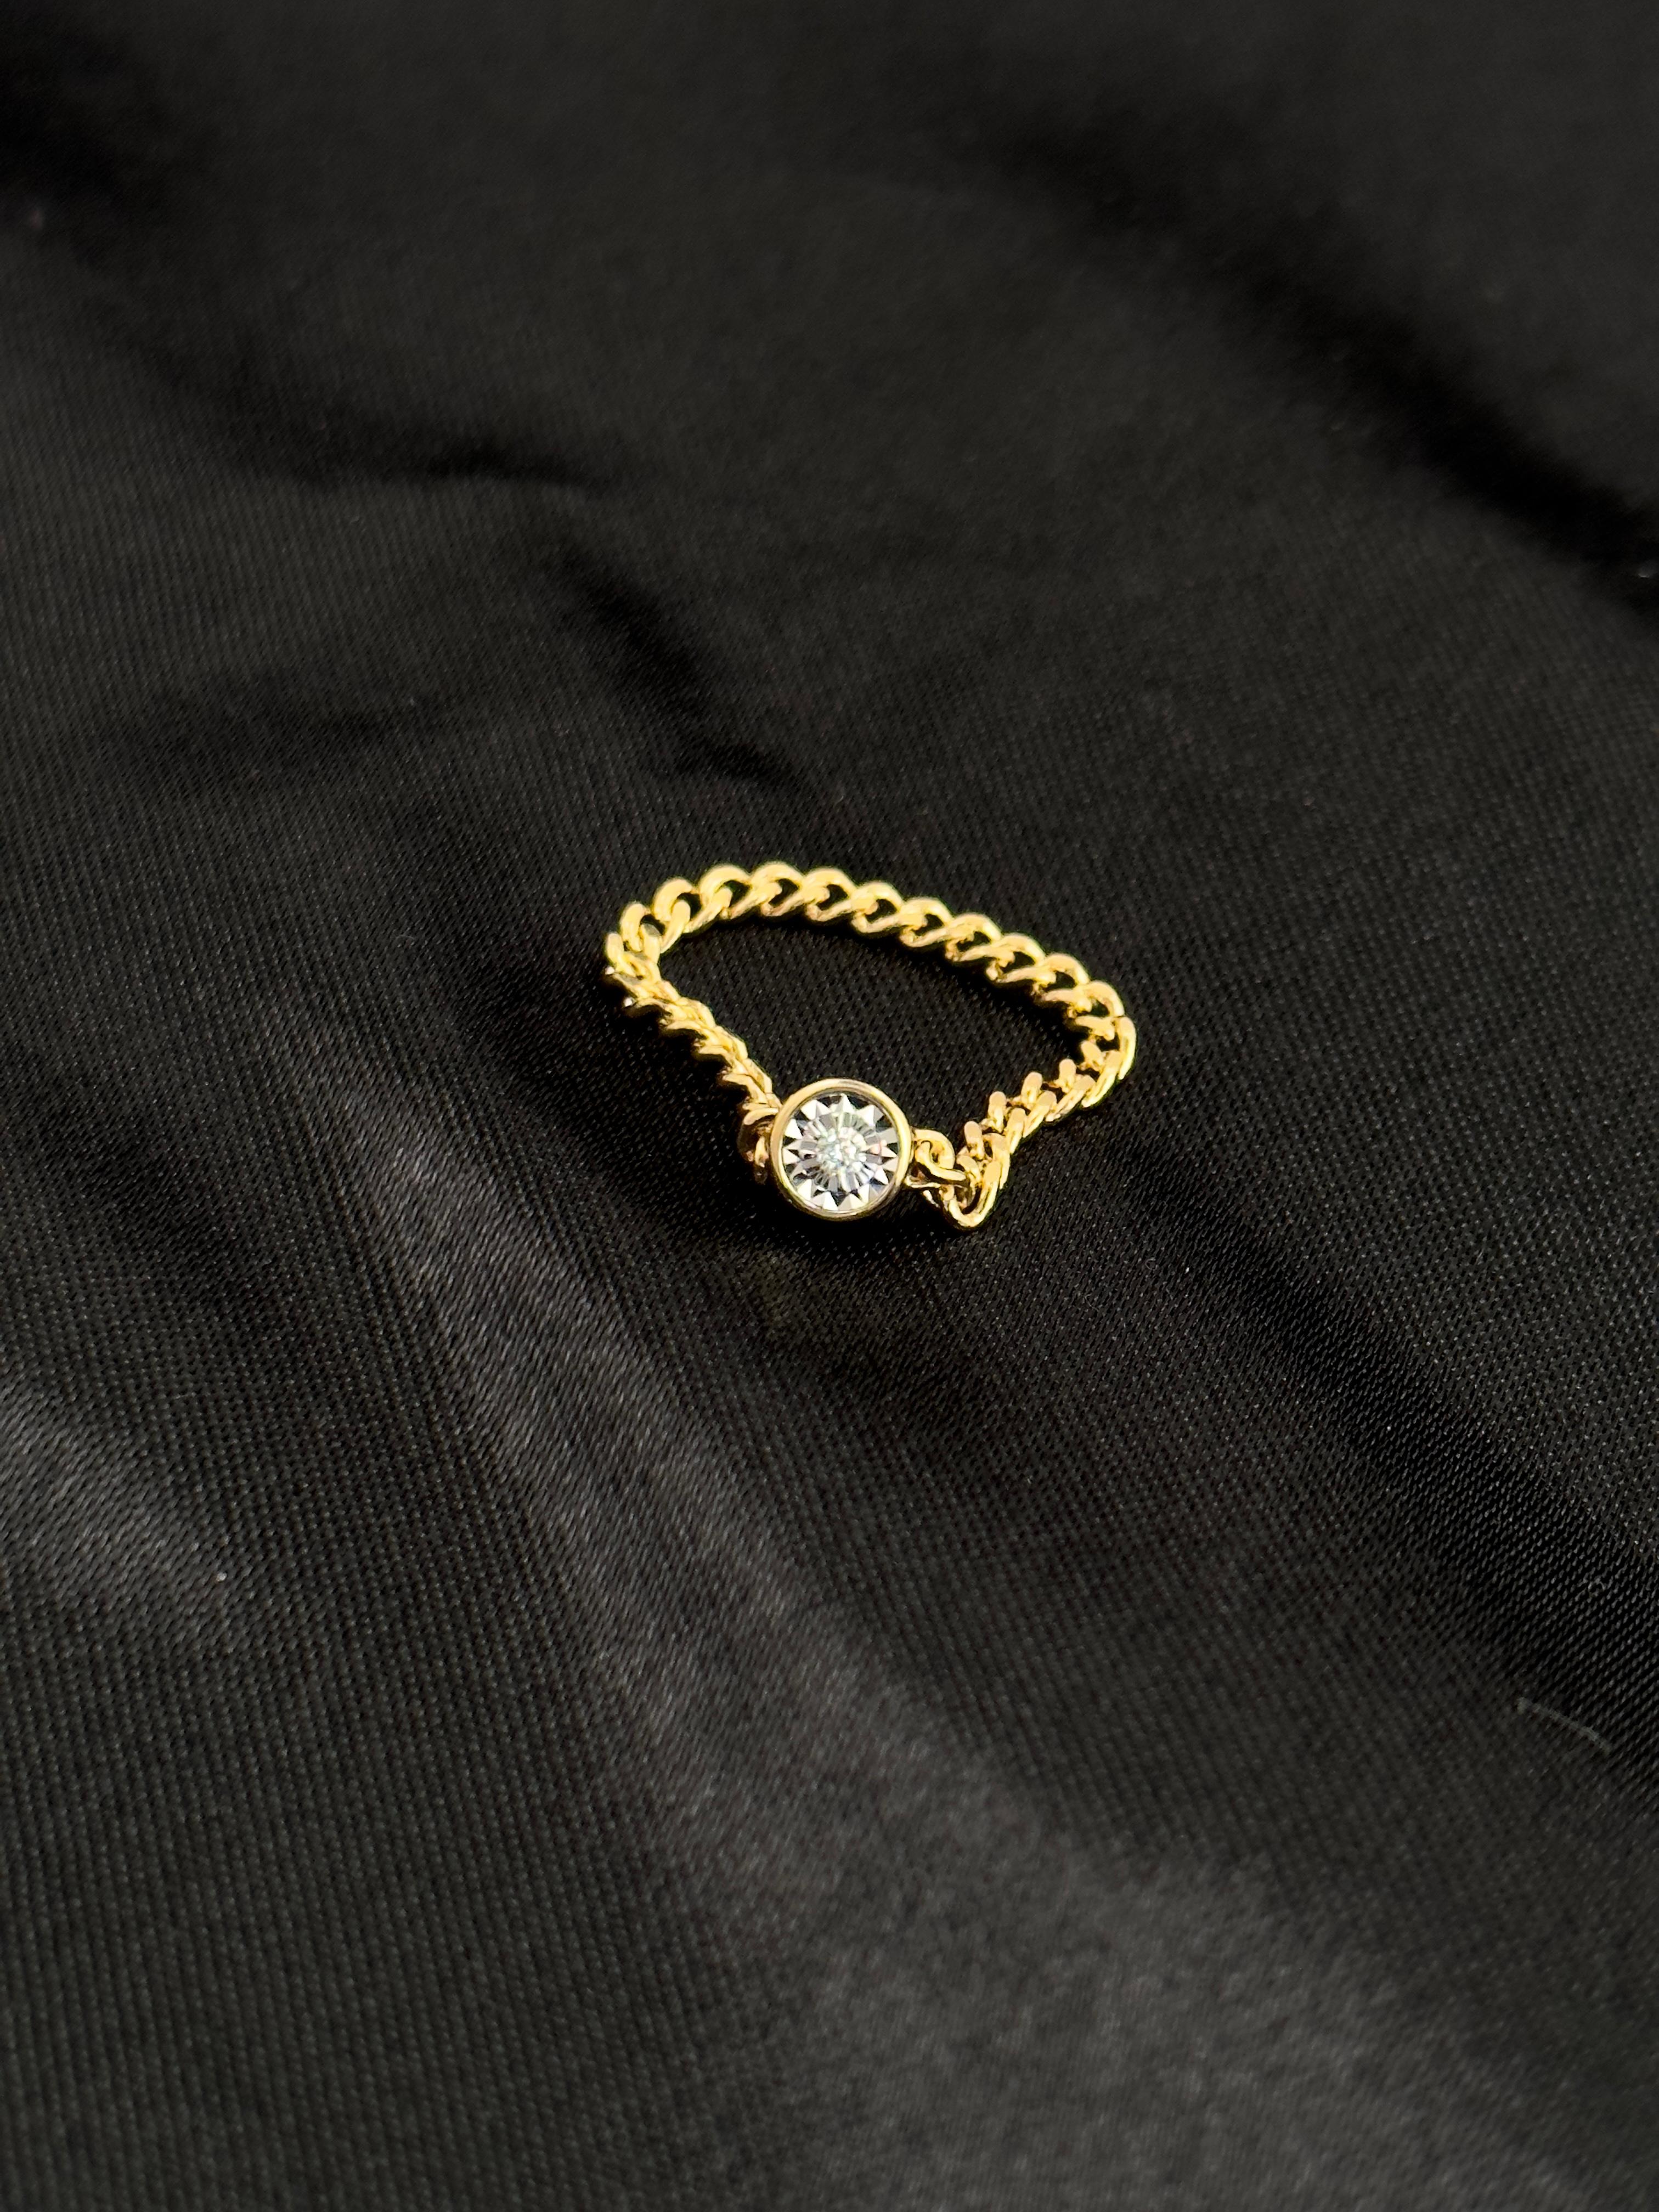 Round Cut Diamond Chain Ring, Solid Gold Chain Ring, Stackable Chain Ring, Natural Diamond For Sale